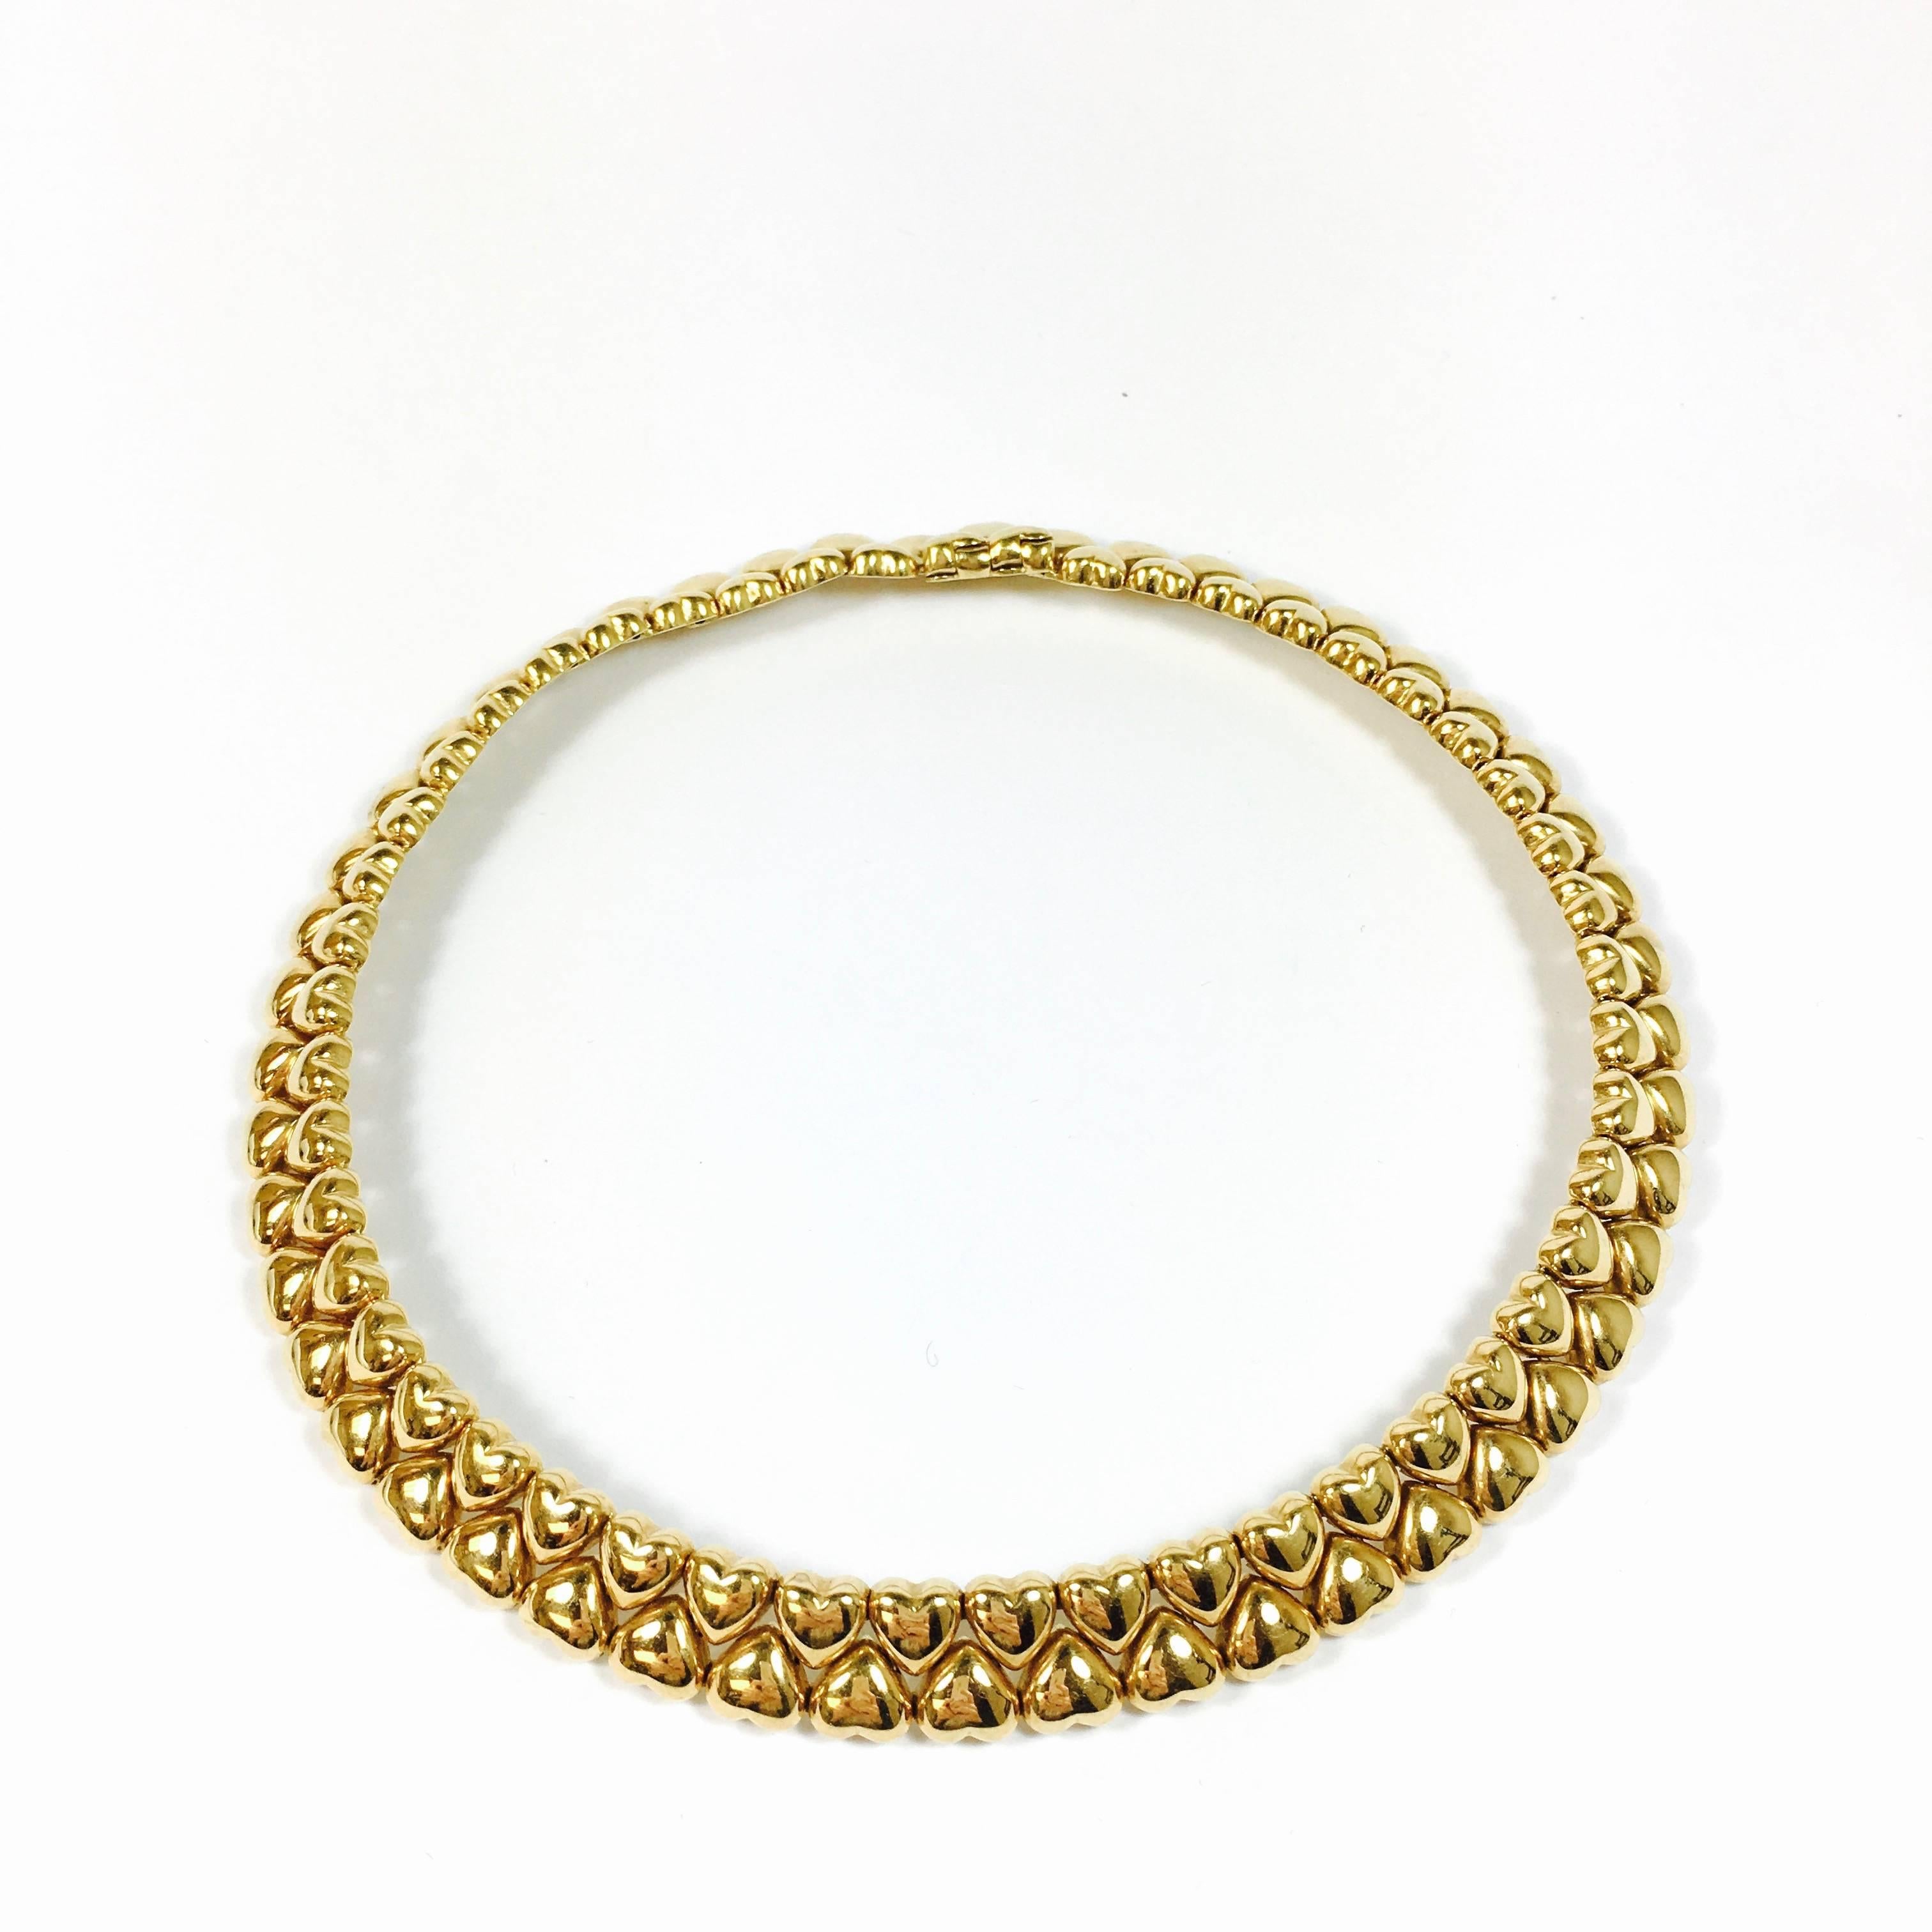 Vintage Cartier collar necklace in 18k yellow gold from the Double Coeurs 1994 collection, features two rows of heart-shaped links. Original box and cerificate of authencity included. 
Measurements:
Length: 15 inches
Width: 0.5 inch
Weight: 88.2